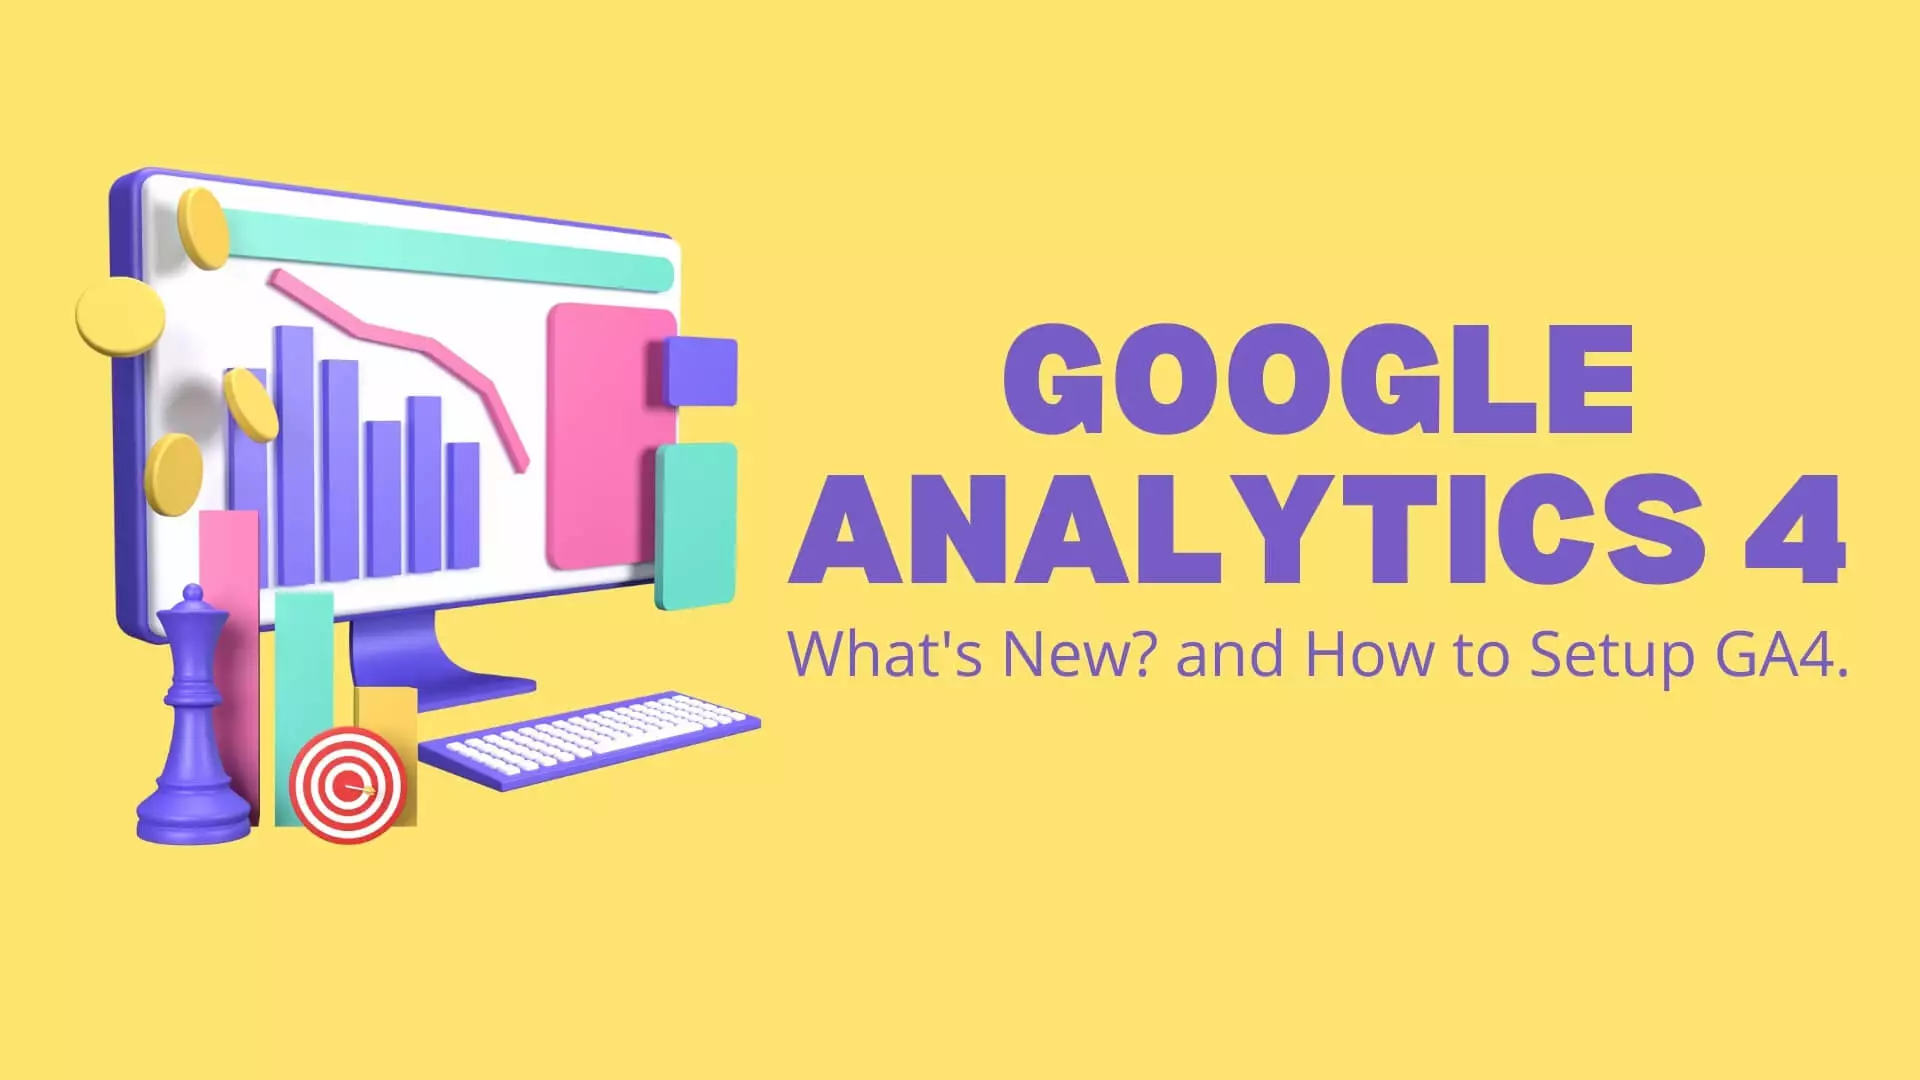 Google Analytics 4 - What's New? How to get started with GA4